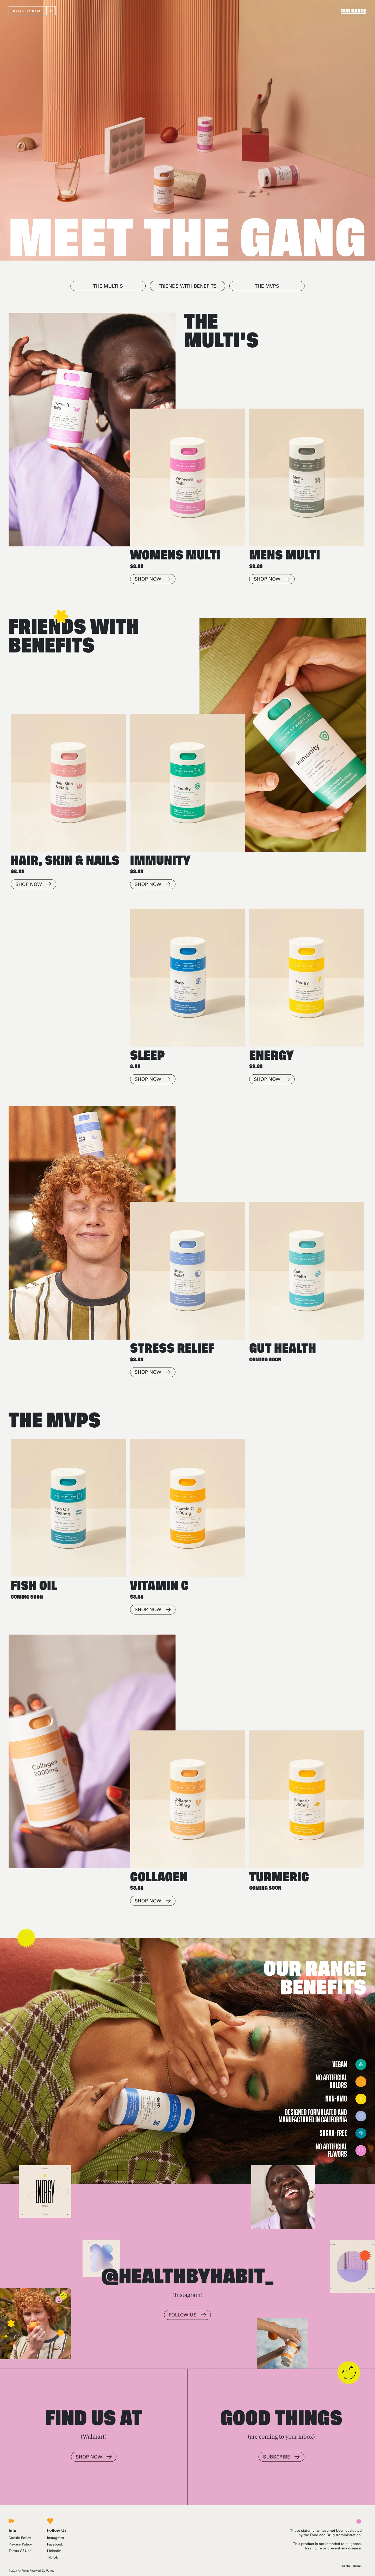 Health By Habit Landing Page Example: We believe looking after your health should be as simple and straightforward as possible, so this means making products that fit easily into your life.